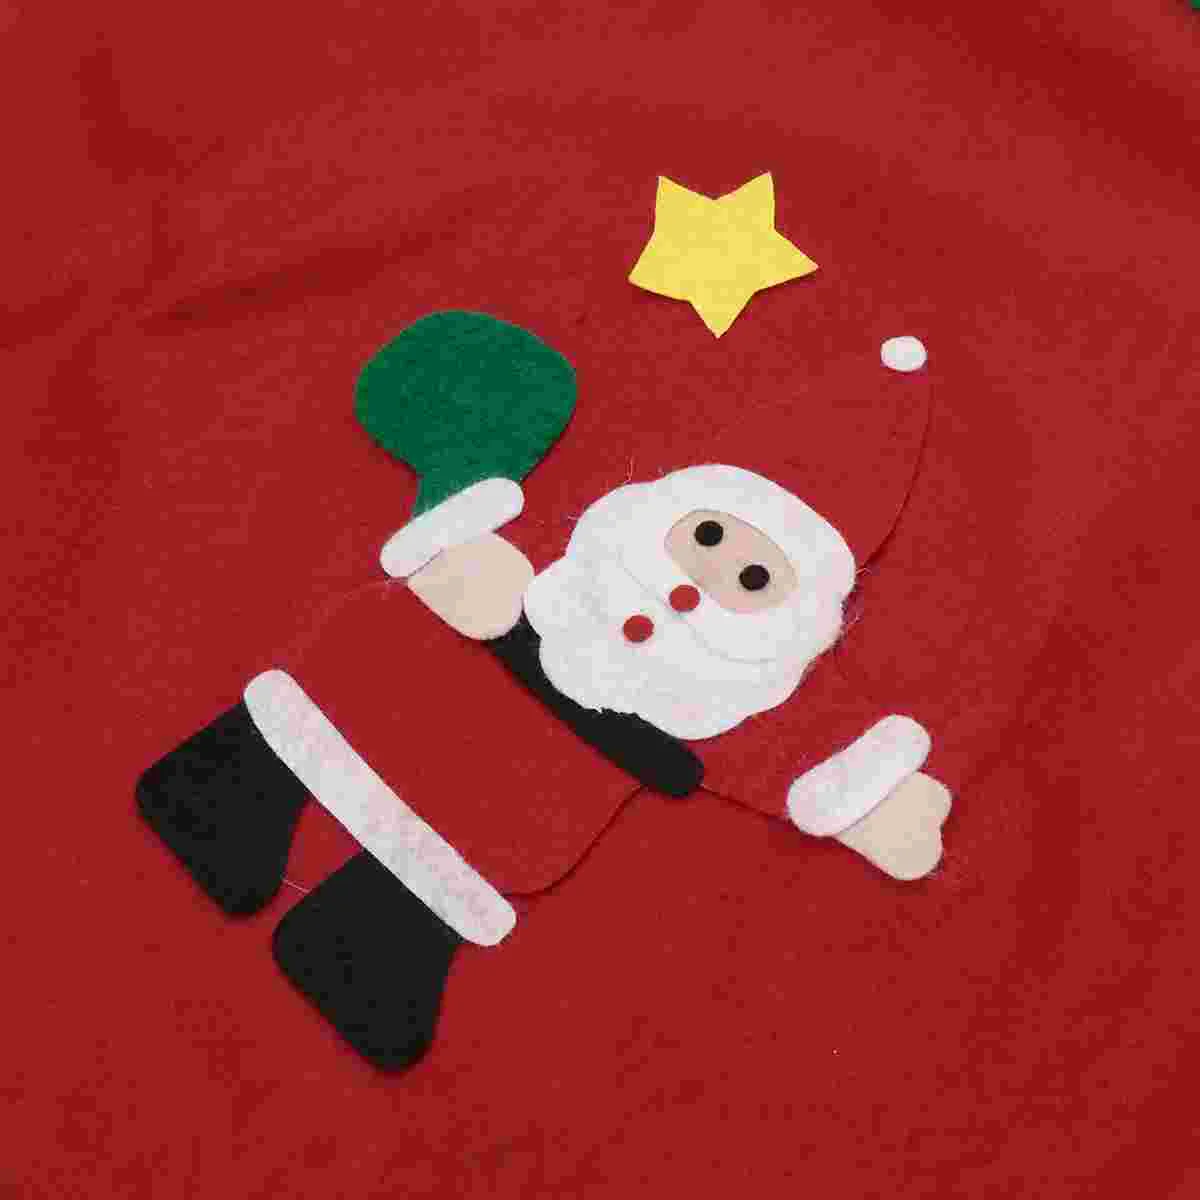 Details about   Cute Christmas Round Tree Skirts w/ Santa Claus Pattern Circle Base Cover 86cm ☆ 